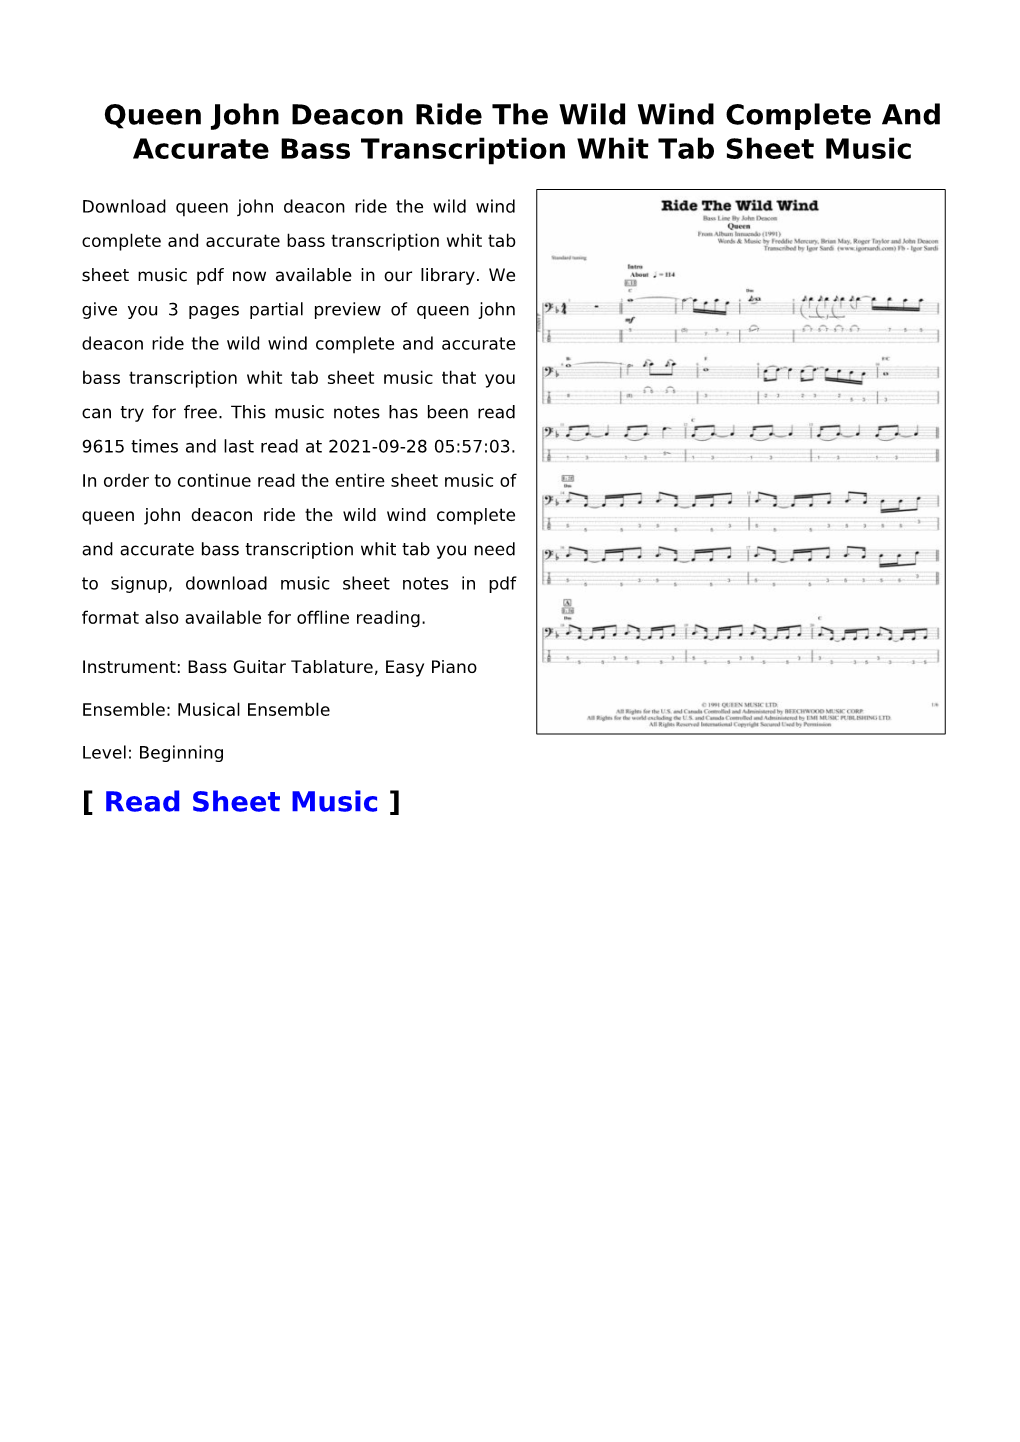 Queen John Deacon Ride the Wild Wind Complete and Accurate Bass Transcription Whit Tab Sheet Music